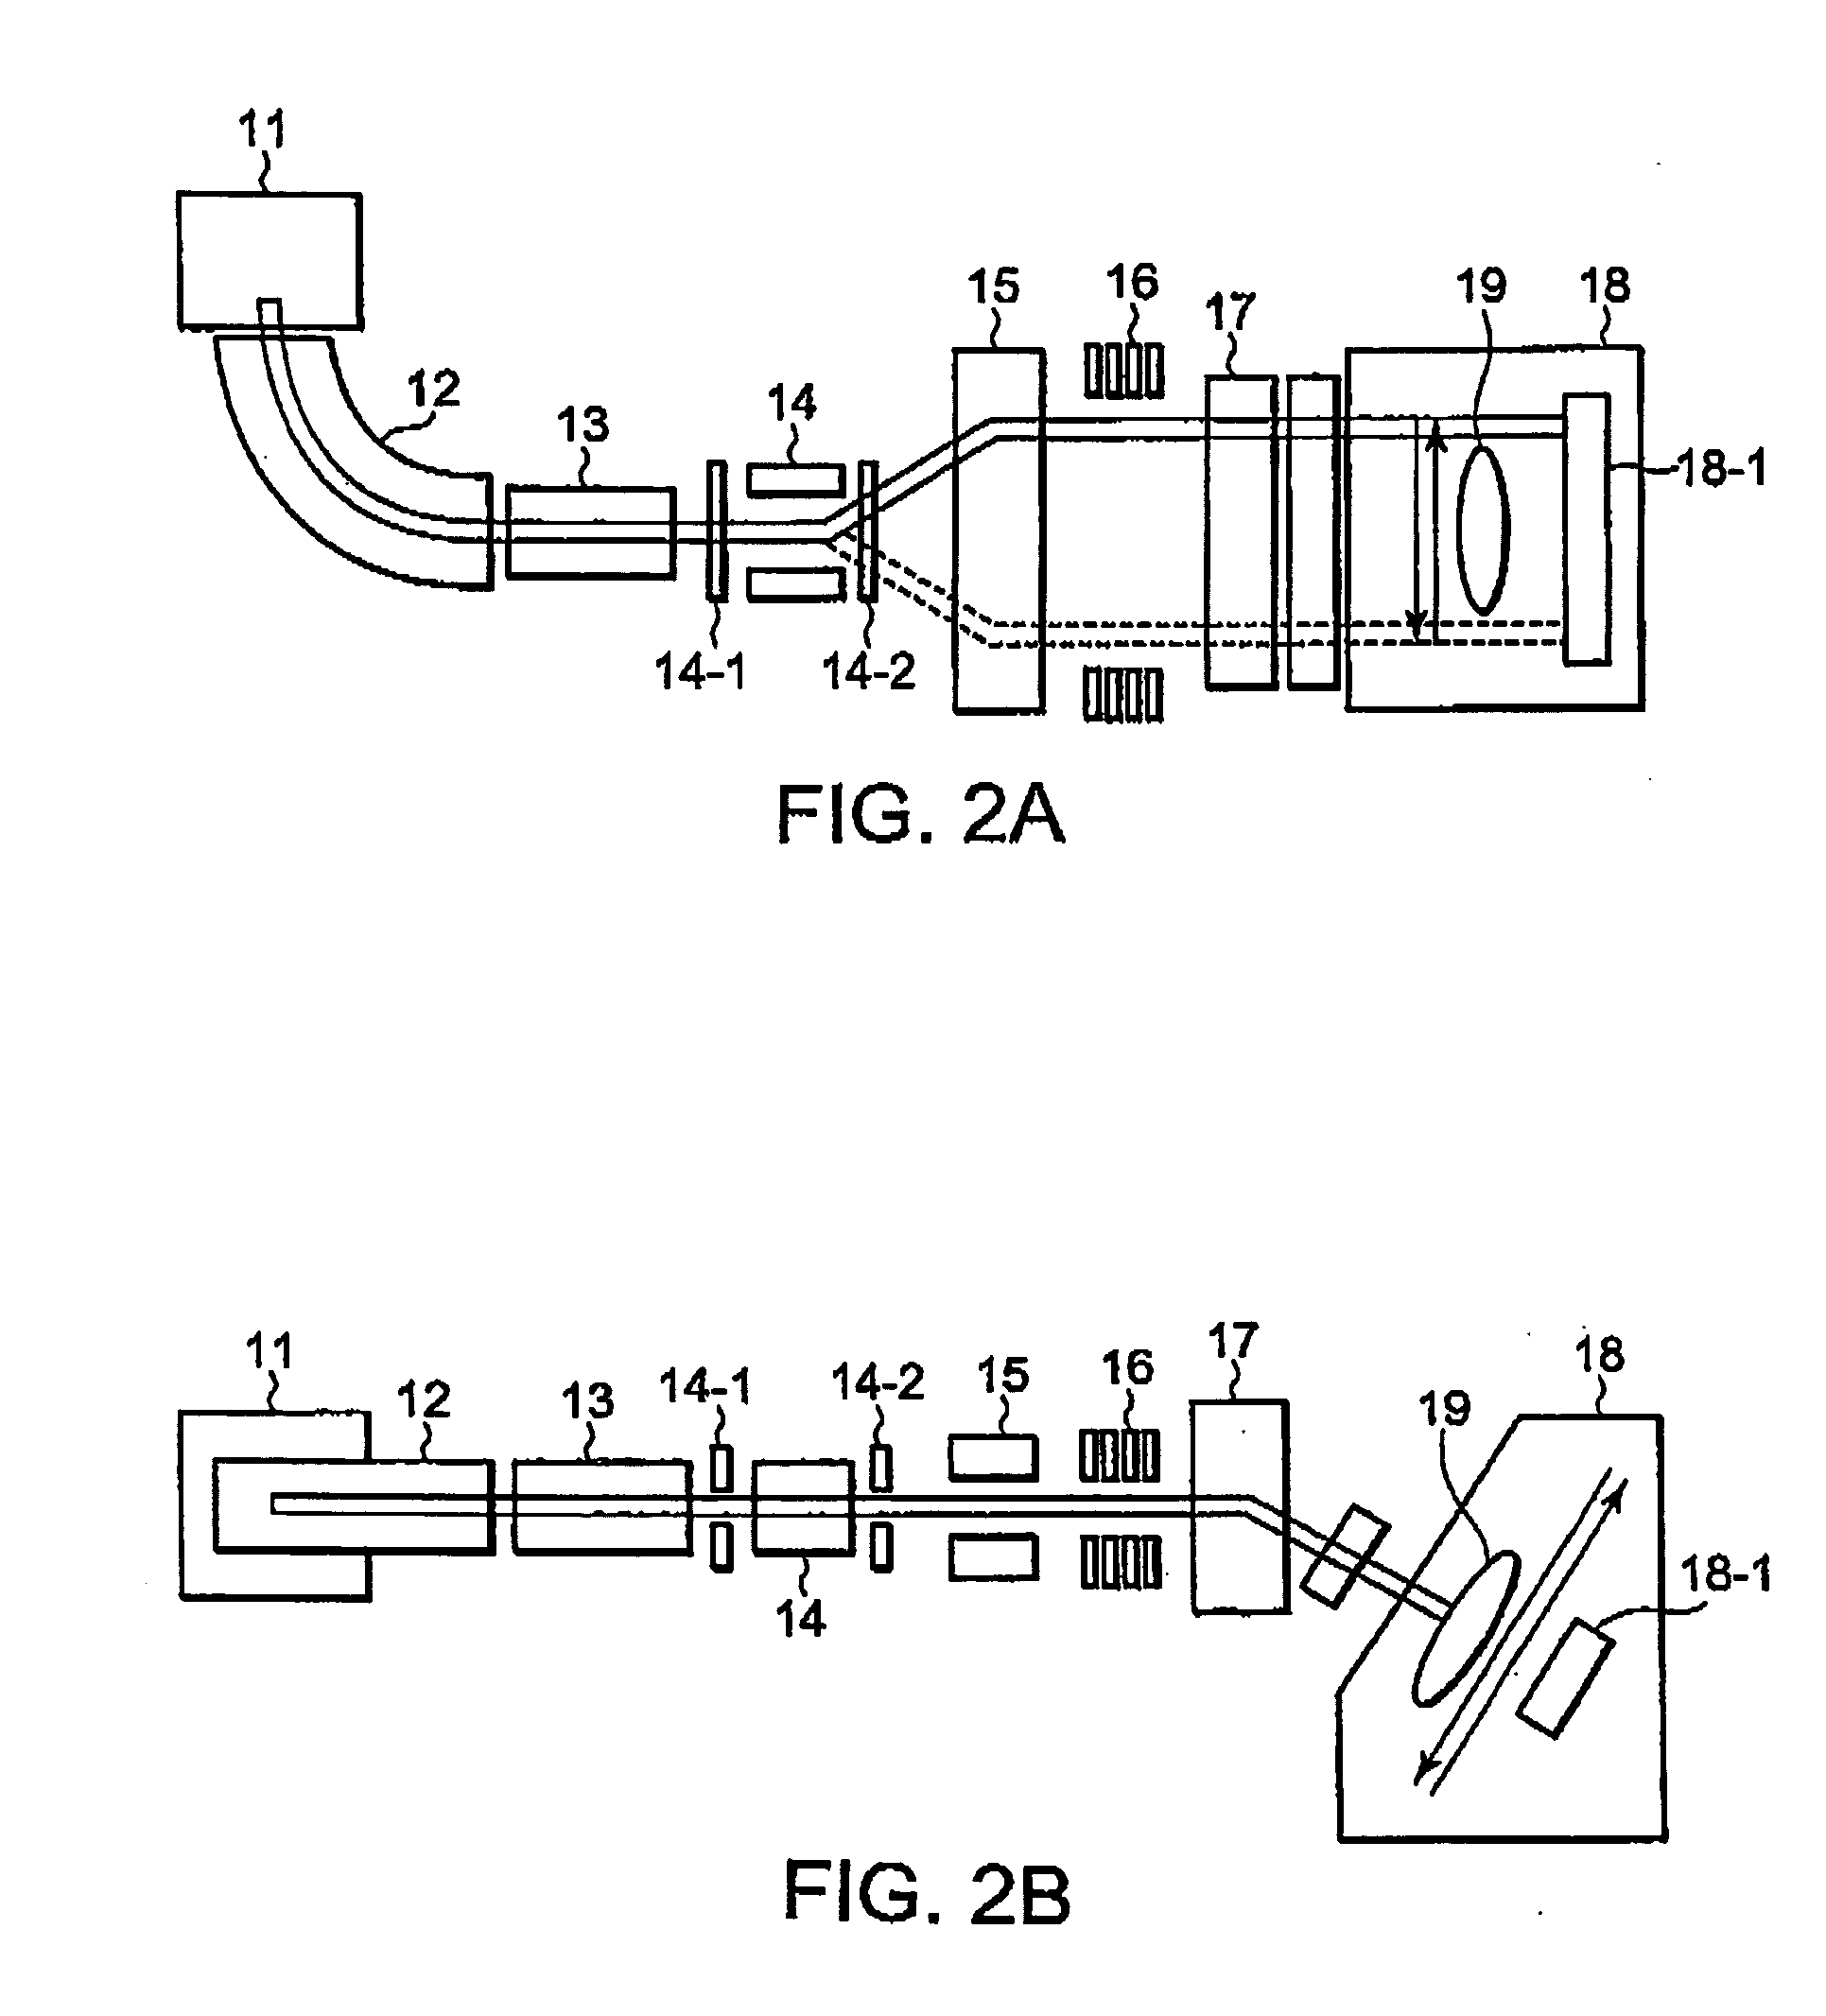 Beam space-charge compensation device and ion implantation system having the same